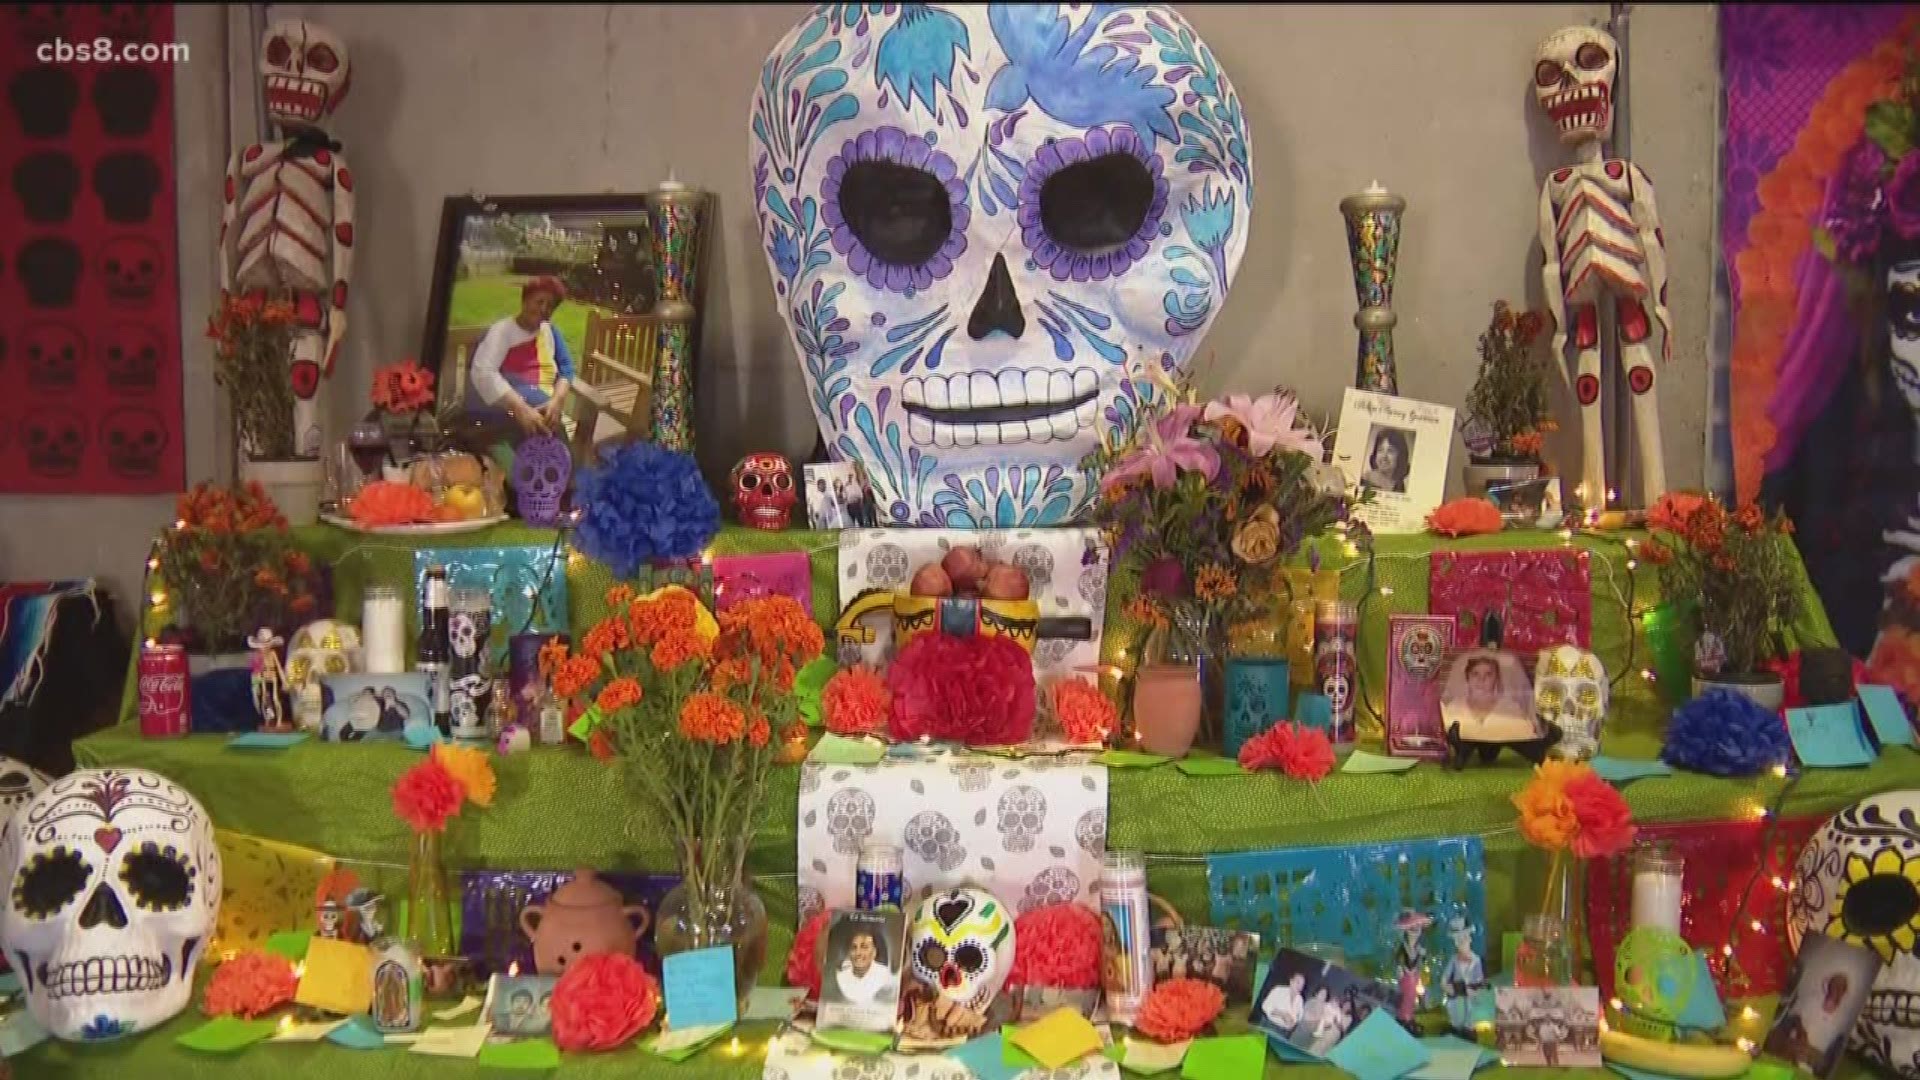 Artists in Sherman Heights are creating beautiful artwork to honor loved ones lost.